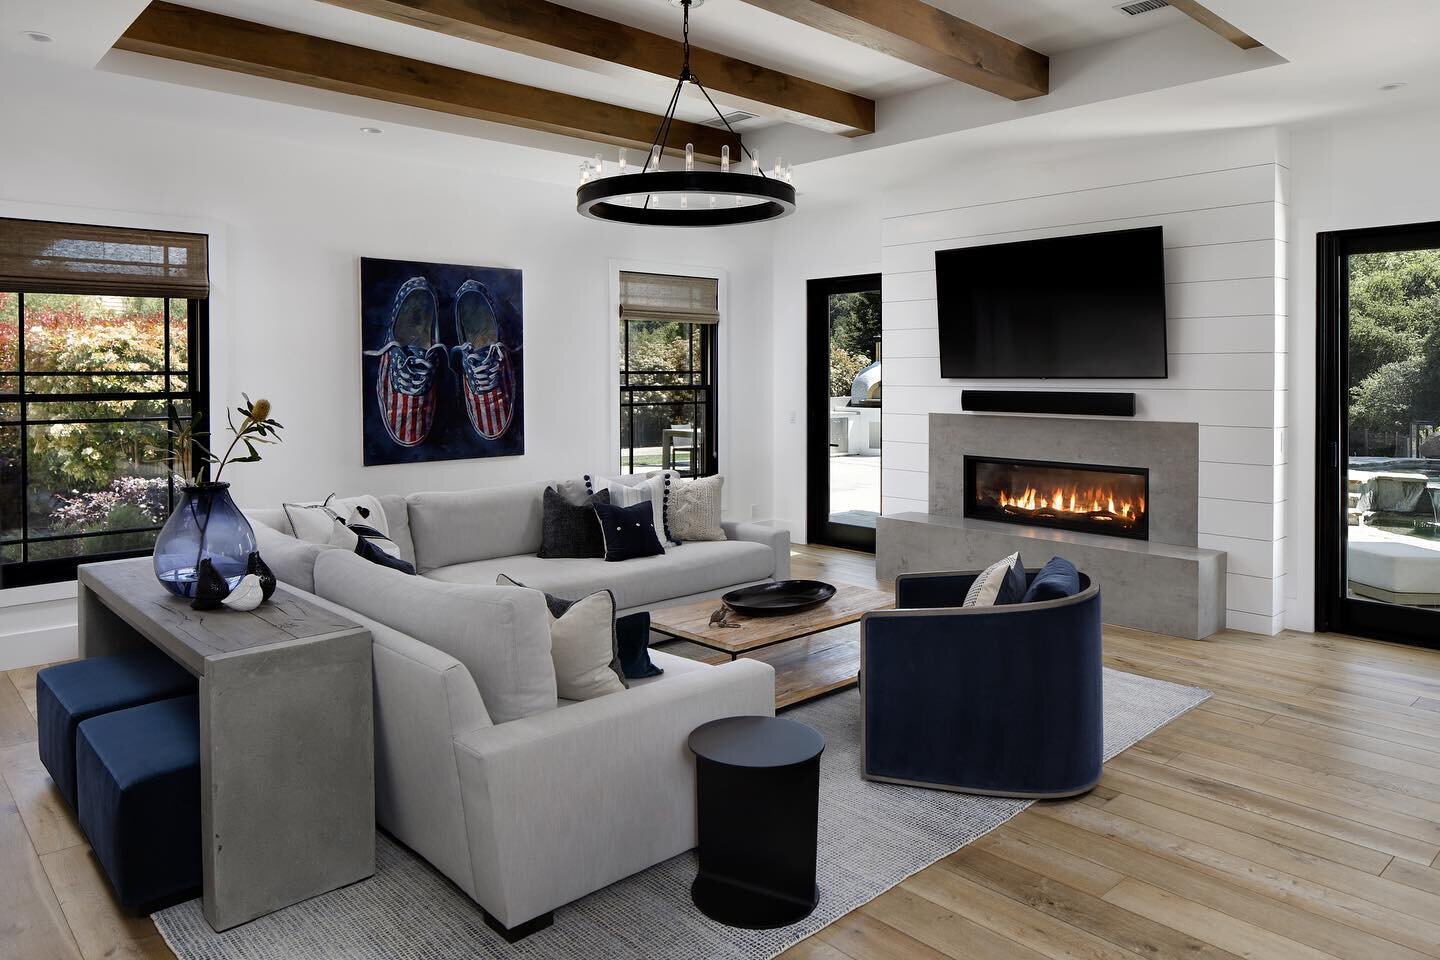 This modern living room seamlessly blends sleek design with inviting comfort, creating a space where style meets relaxation.

#chelseacourtdesigns #interiordesign #modernarchitecture #livingroom